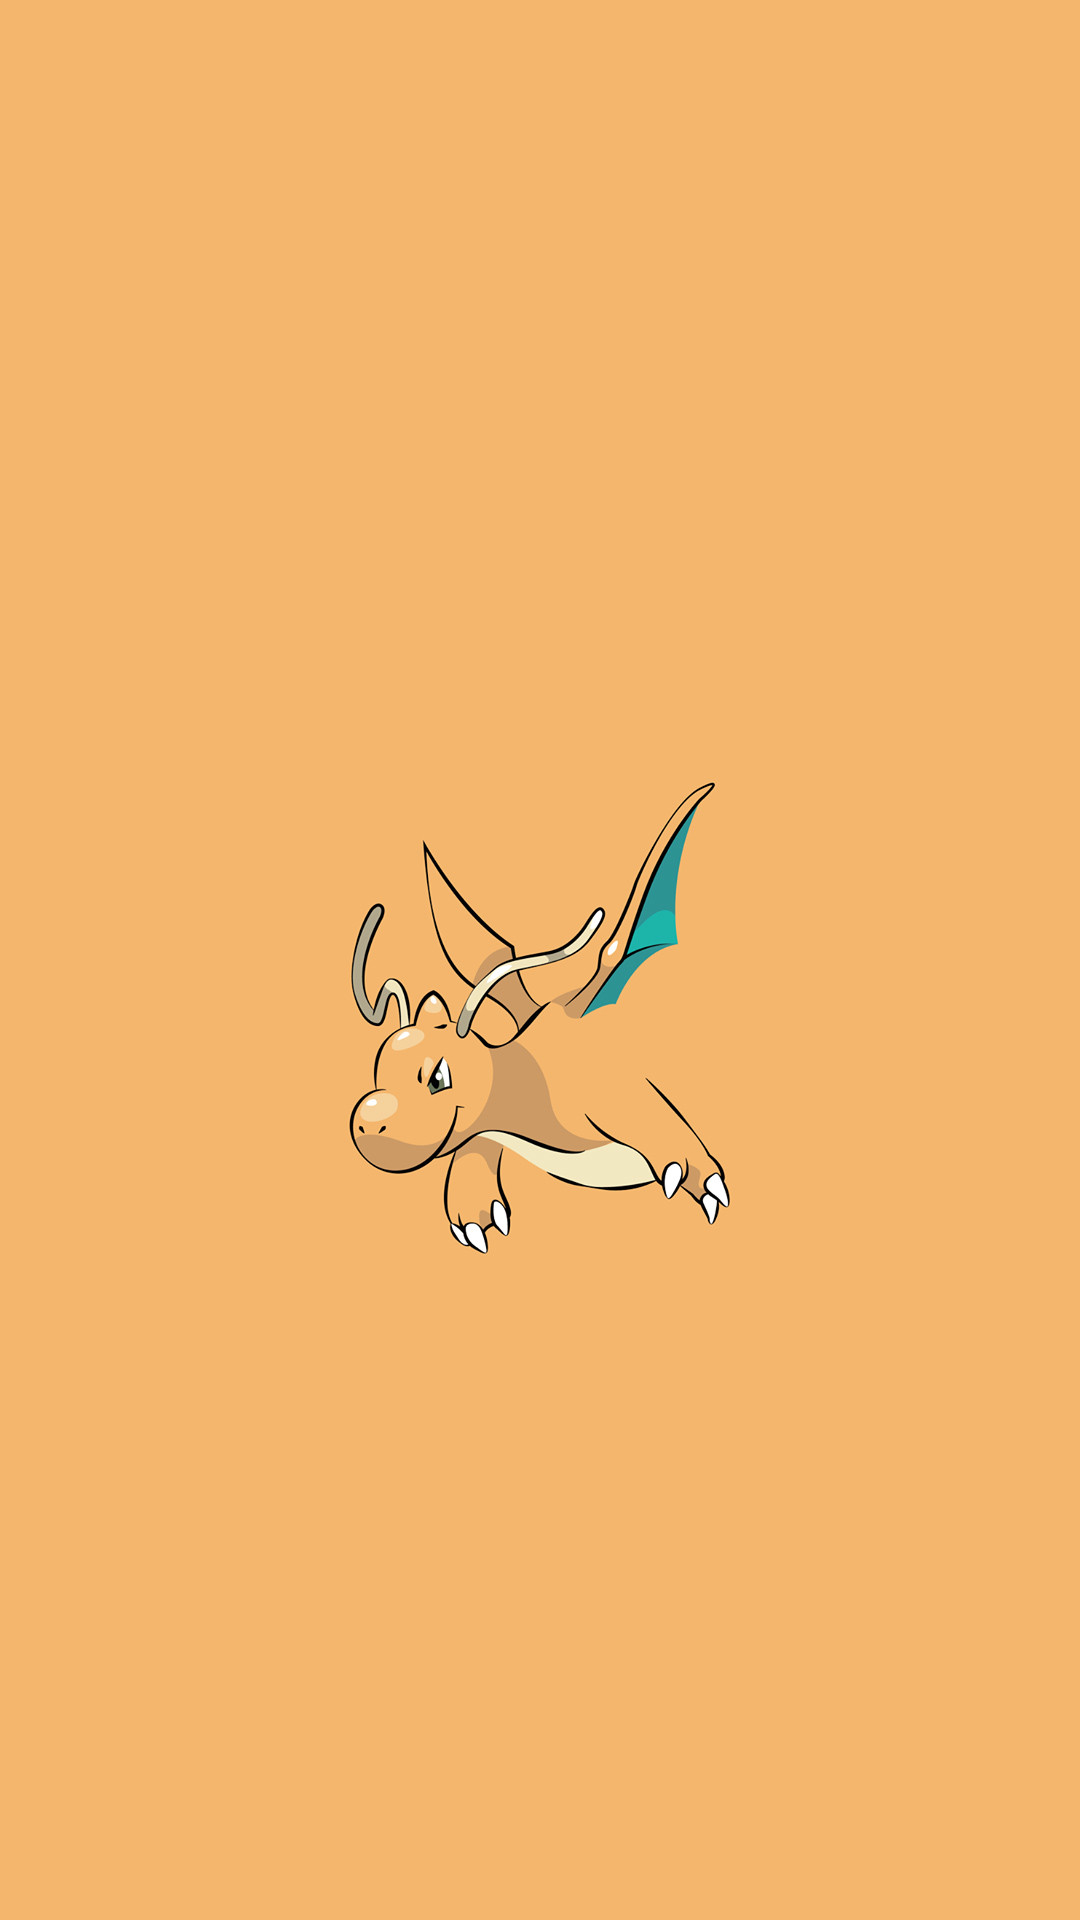 1080x1920 Dragonite Pokemon Character iPhone 6+ HD Wallpaper -  http://freebestpicture.com